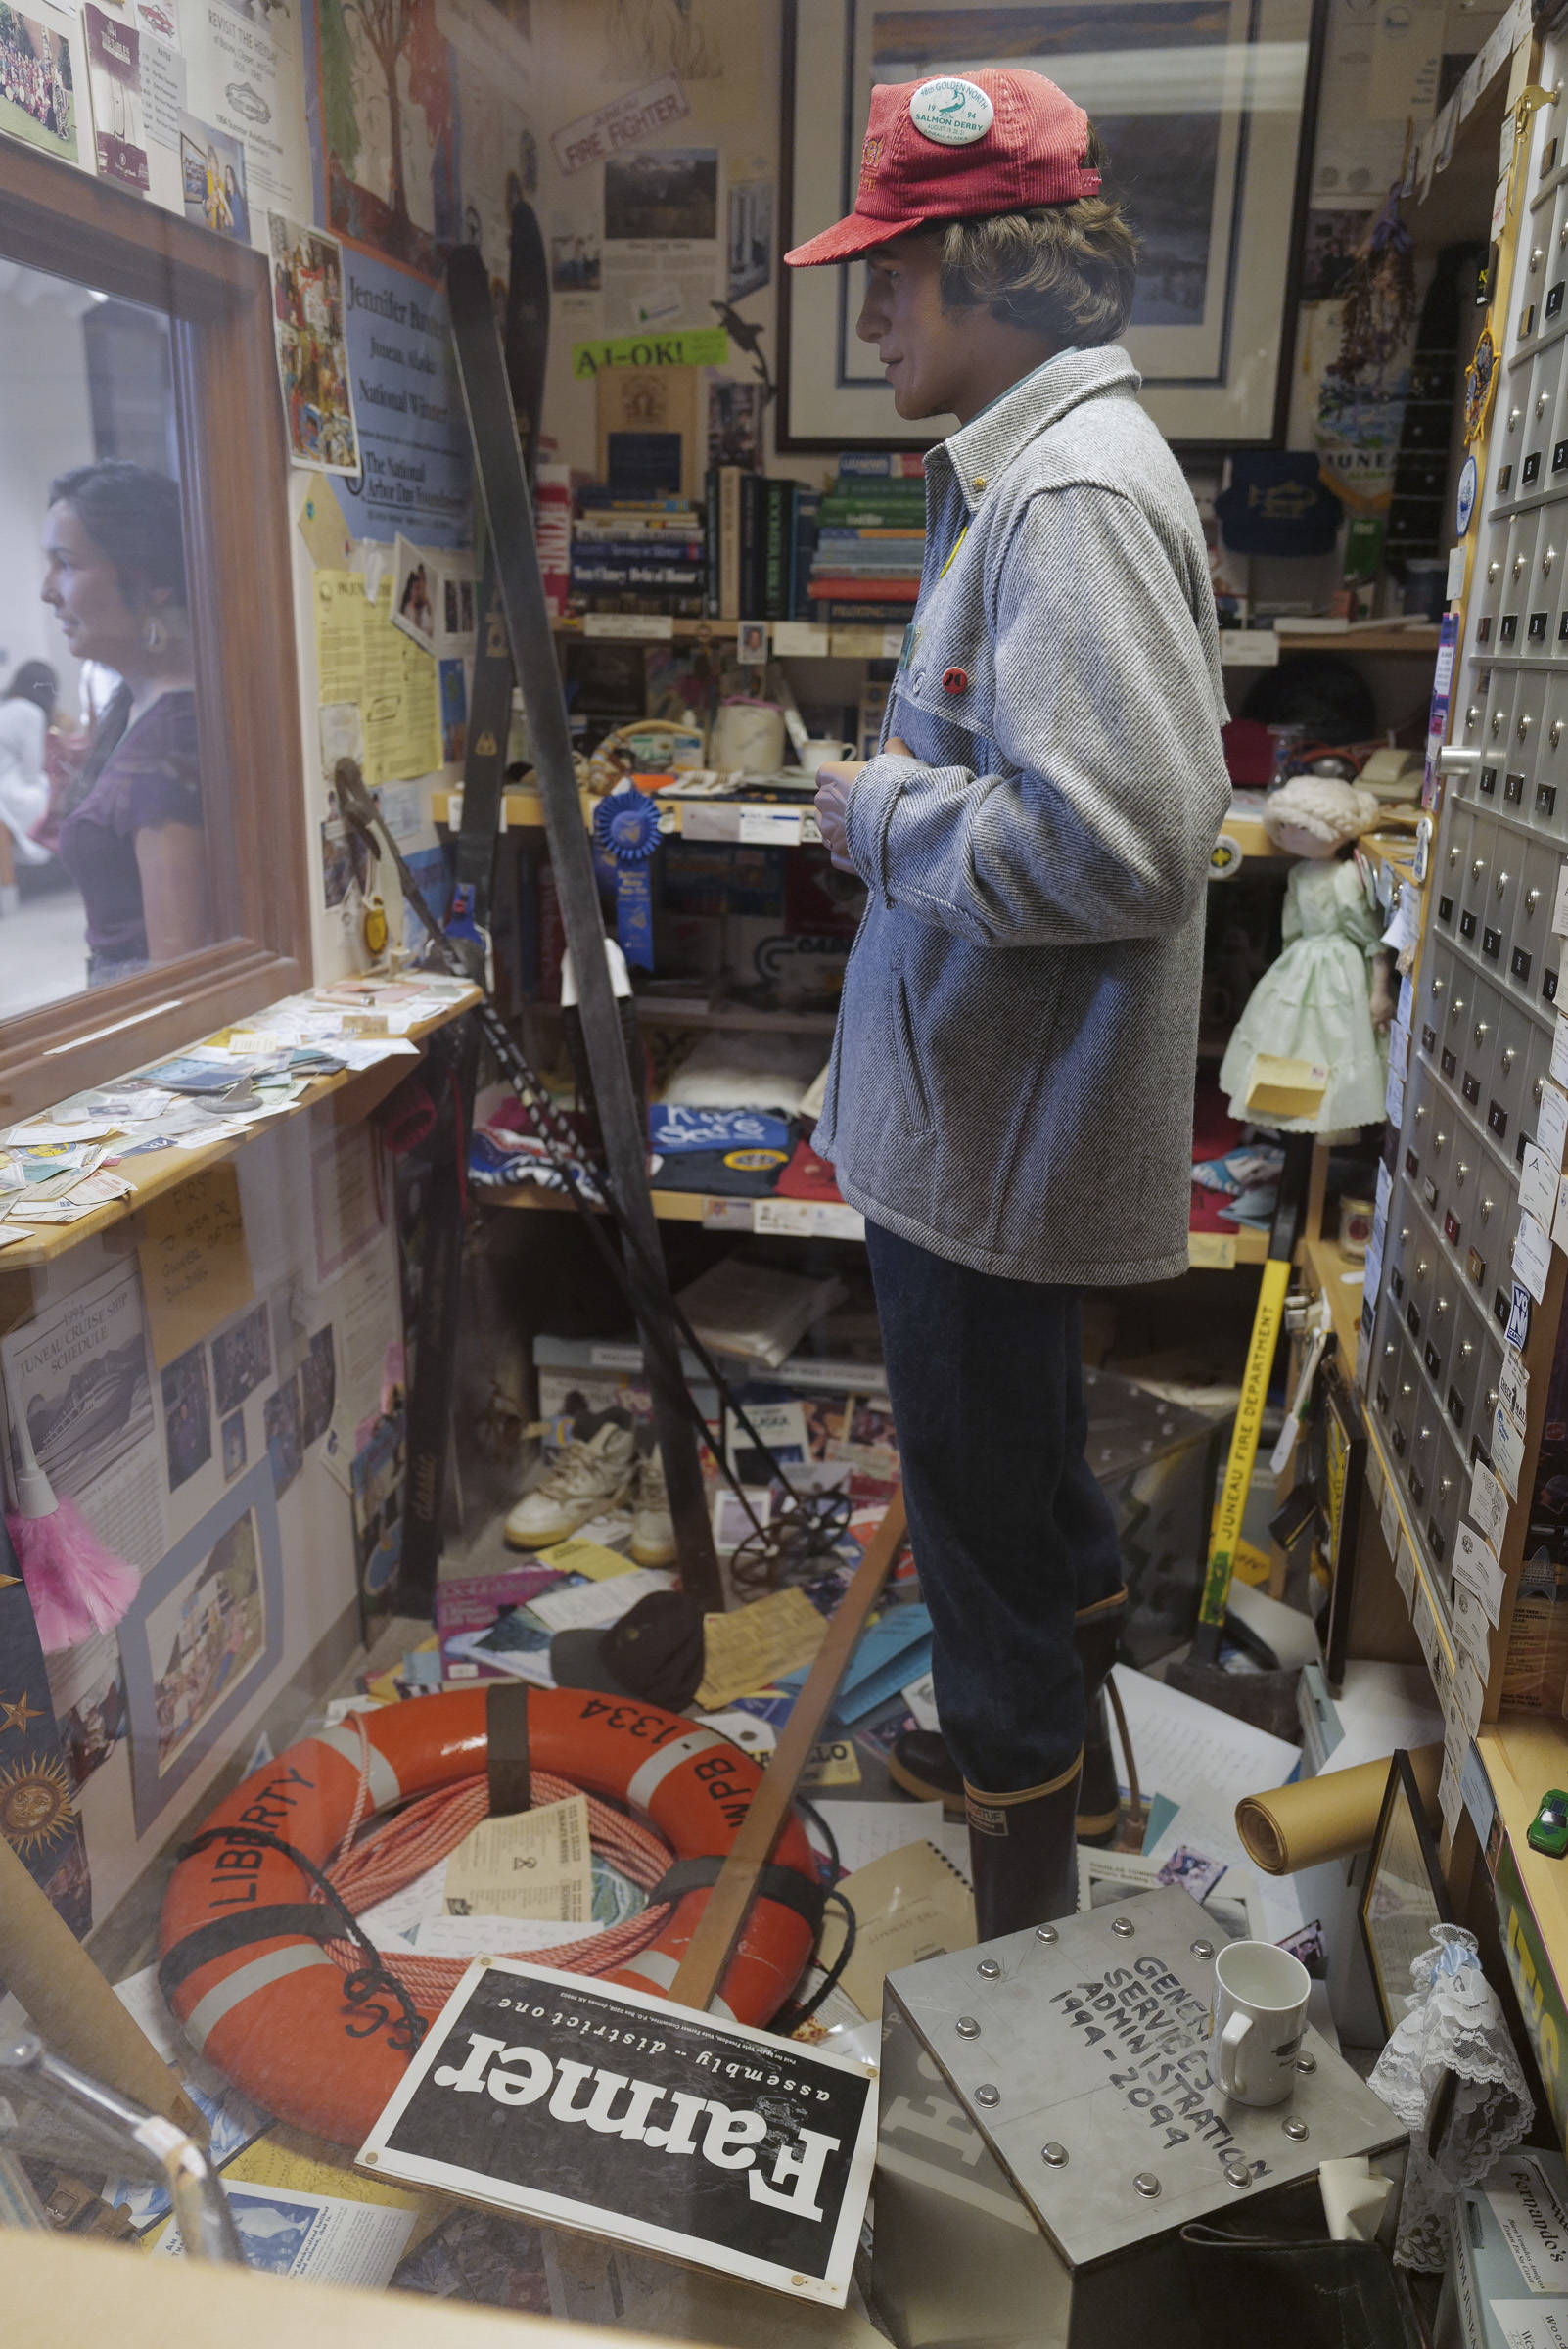 Inside the 1994 Juneau Time Capsule at the Hurff Ackerman Saunders Federal Building in Juneau on Friday, Aug. 9, 2019. Twenty-five year ago a janitors closet was turned into the Juneau Time Capsule. The capsule is set to be opened in 75 more years. (Michael Penn | Juneau Empire)